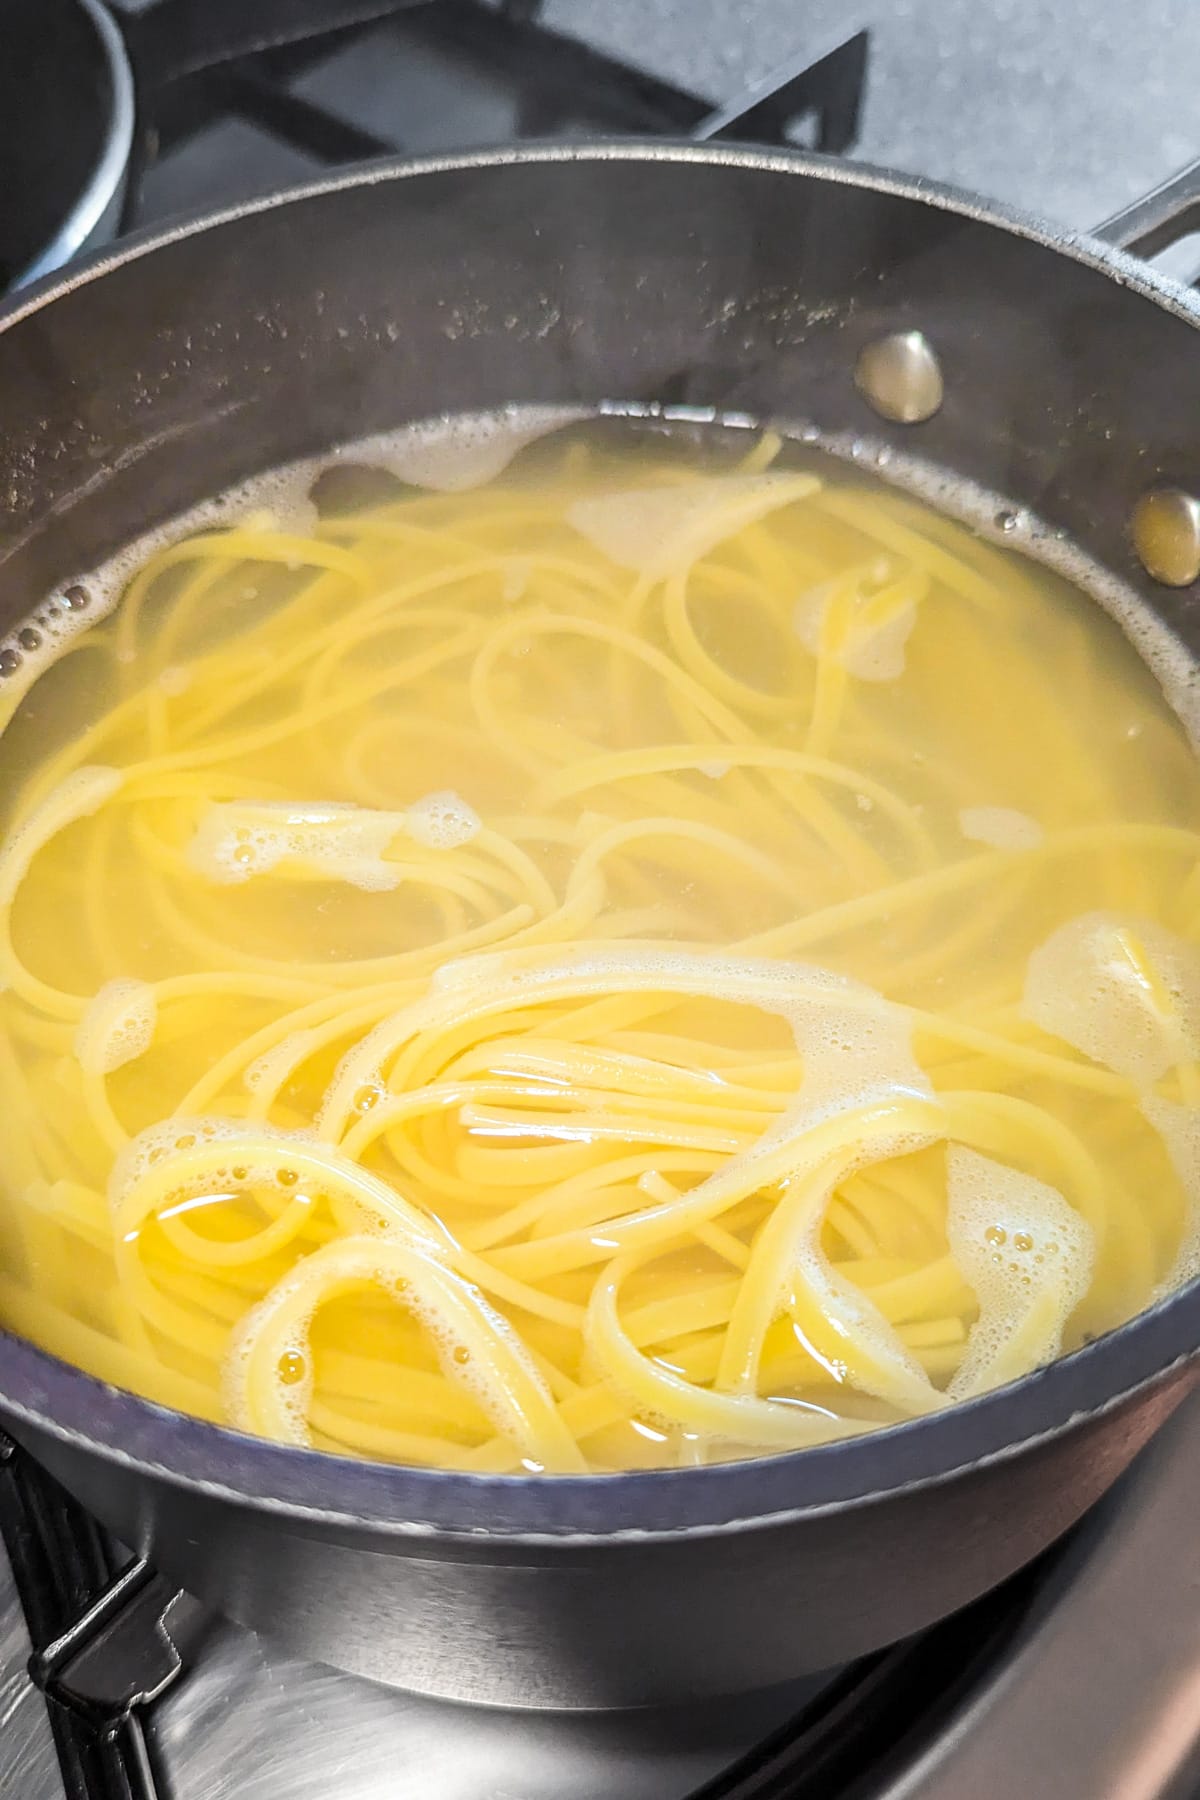 Boiling spaghetti on the stove in a large saucepan.